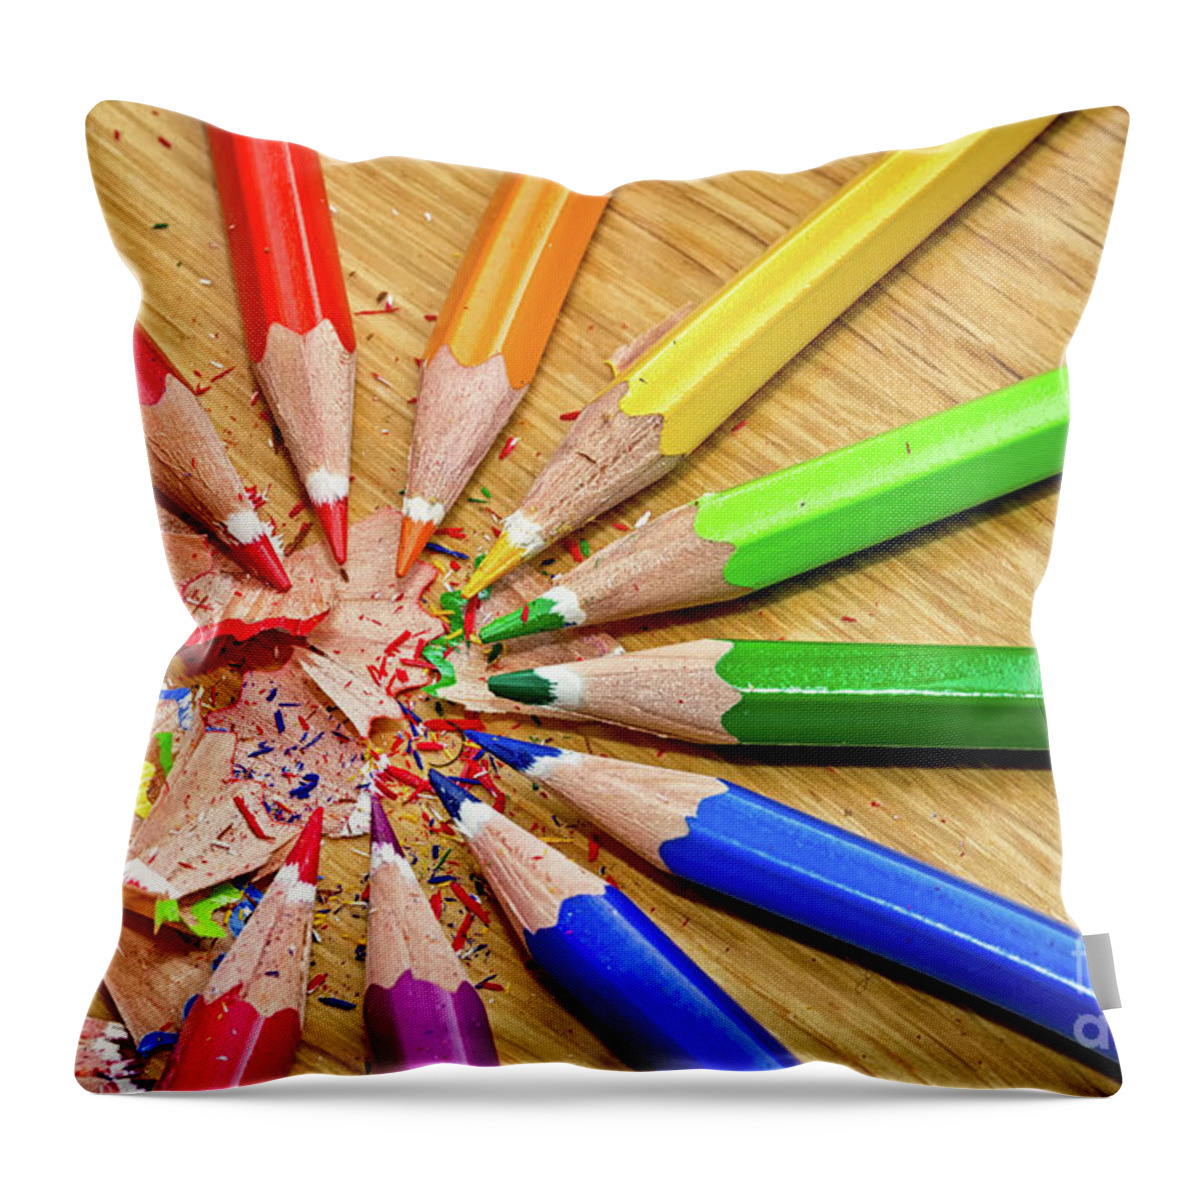 Close-up Throw Pillow featuring the photograph Colored Pencils And Shavings On Table by Gerard Mcauliffe